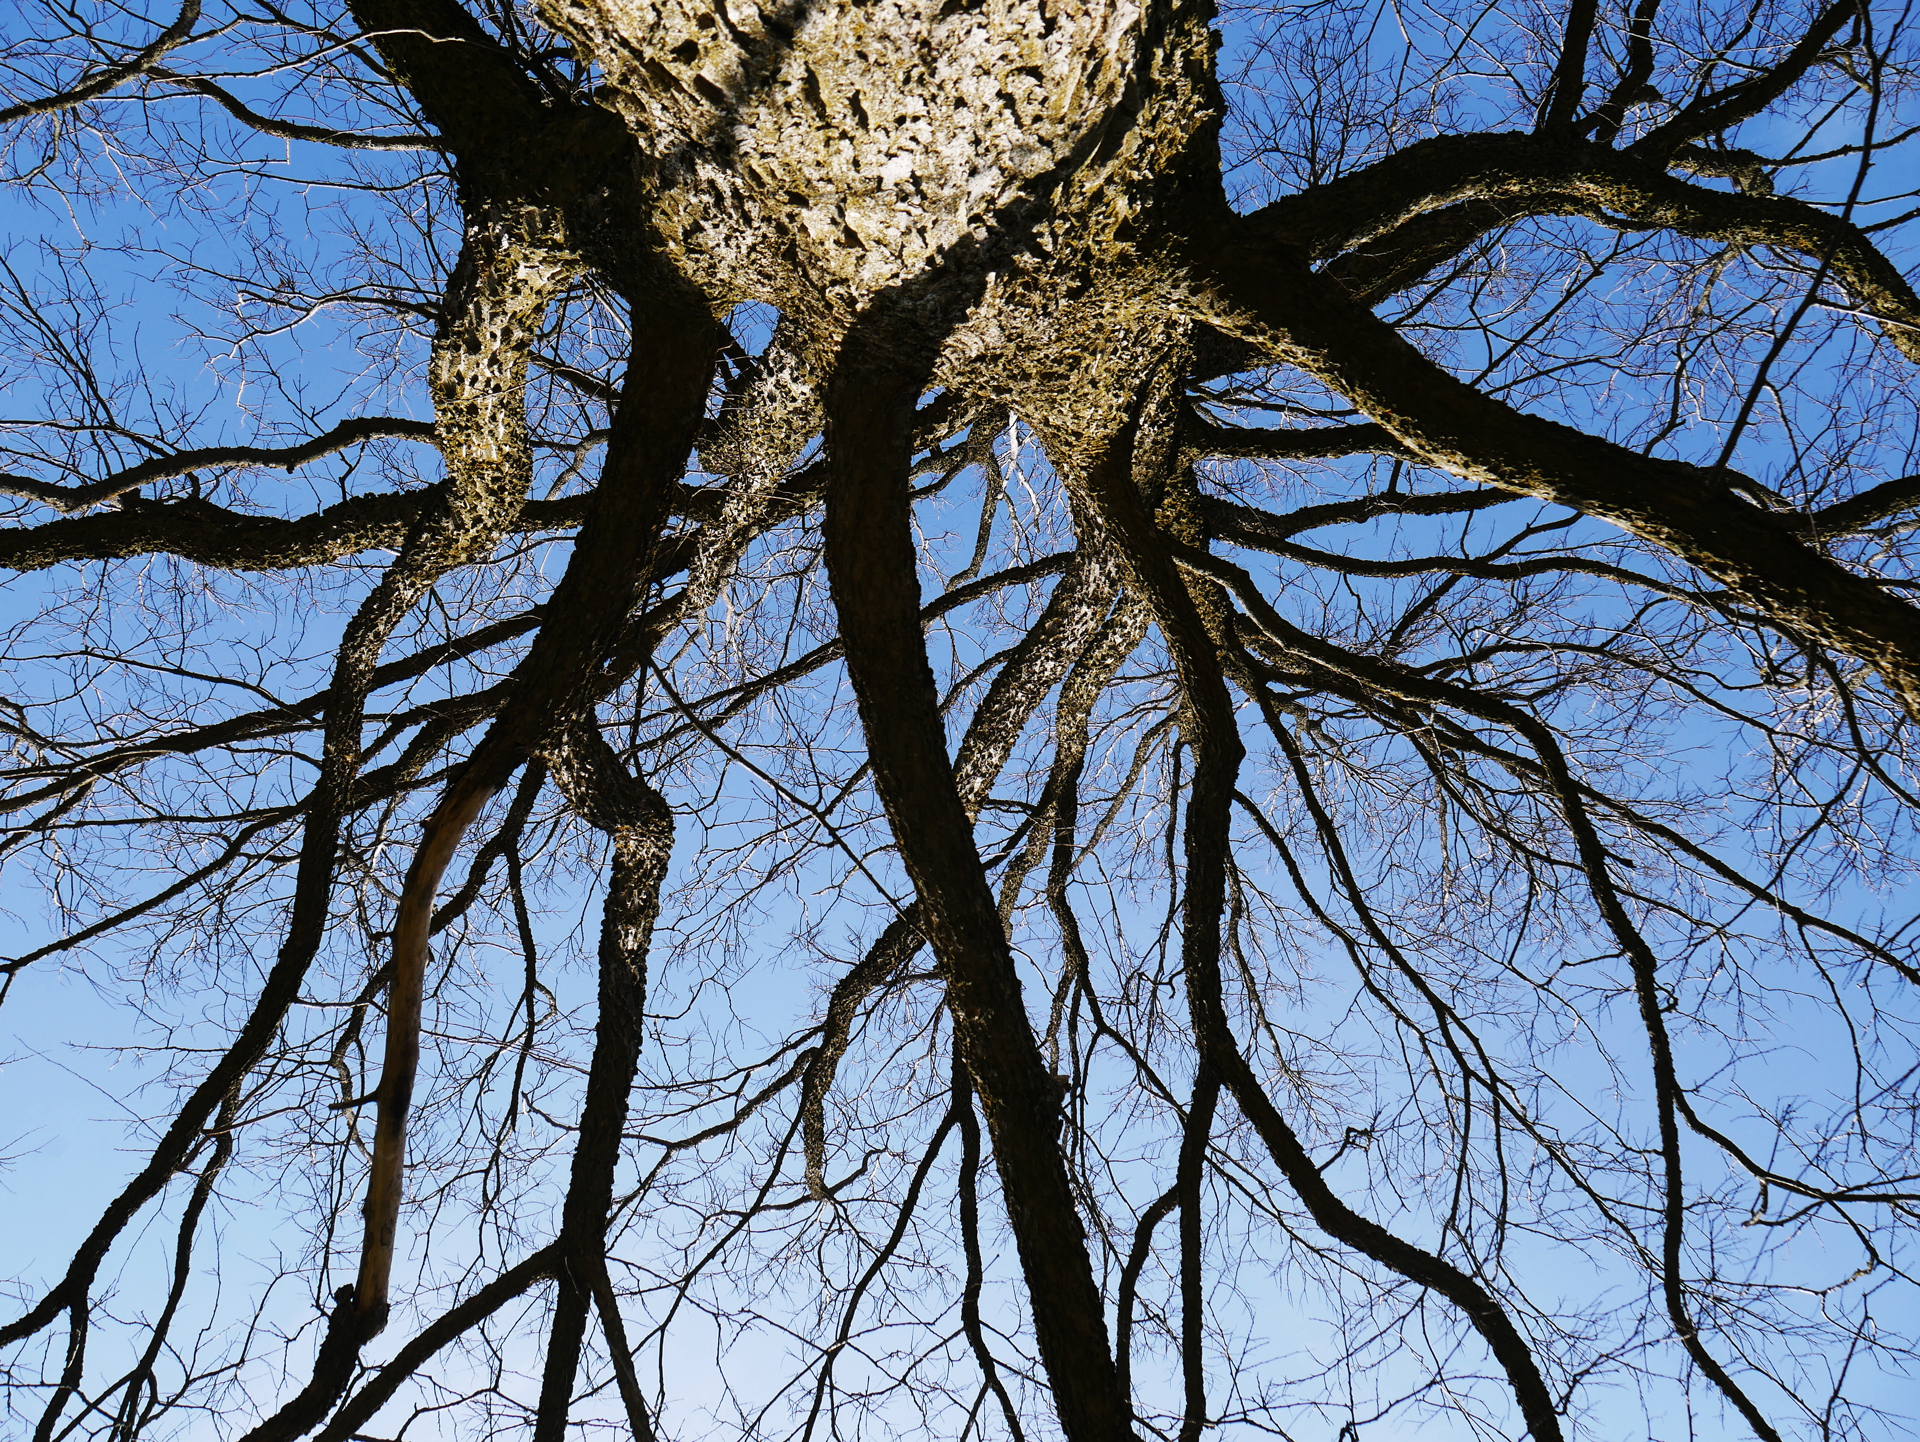 colour photo looking up into a hackberry tree without leaves and the blue sky